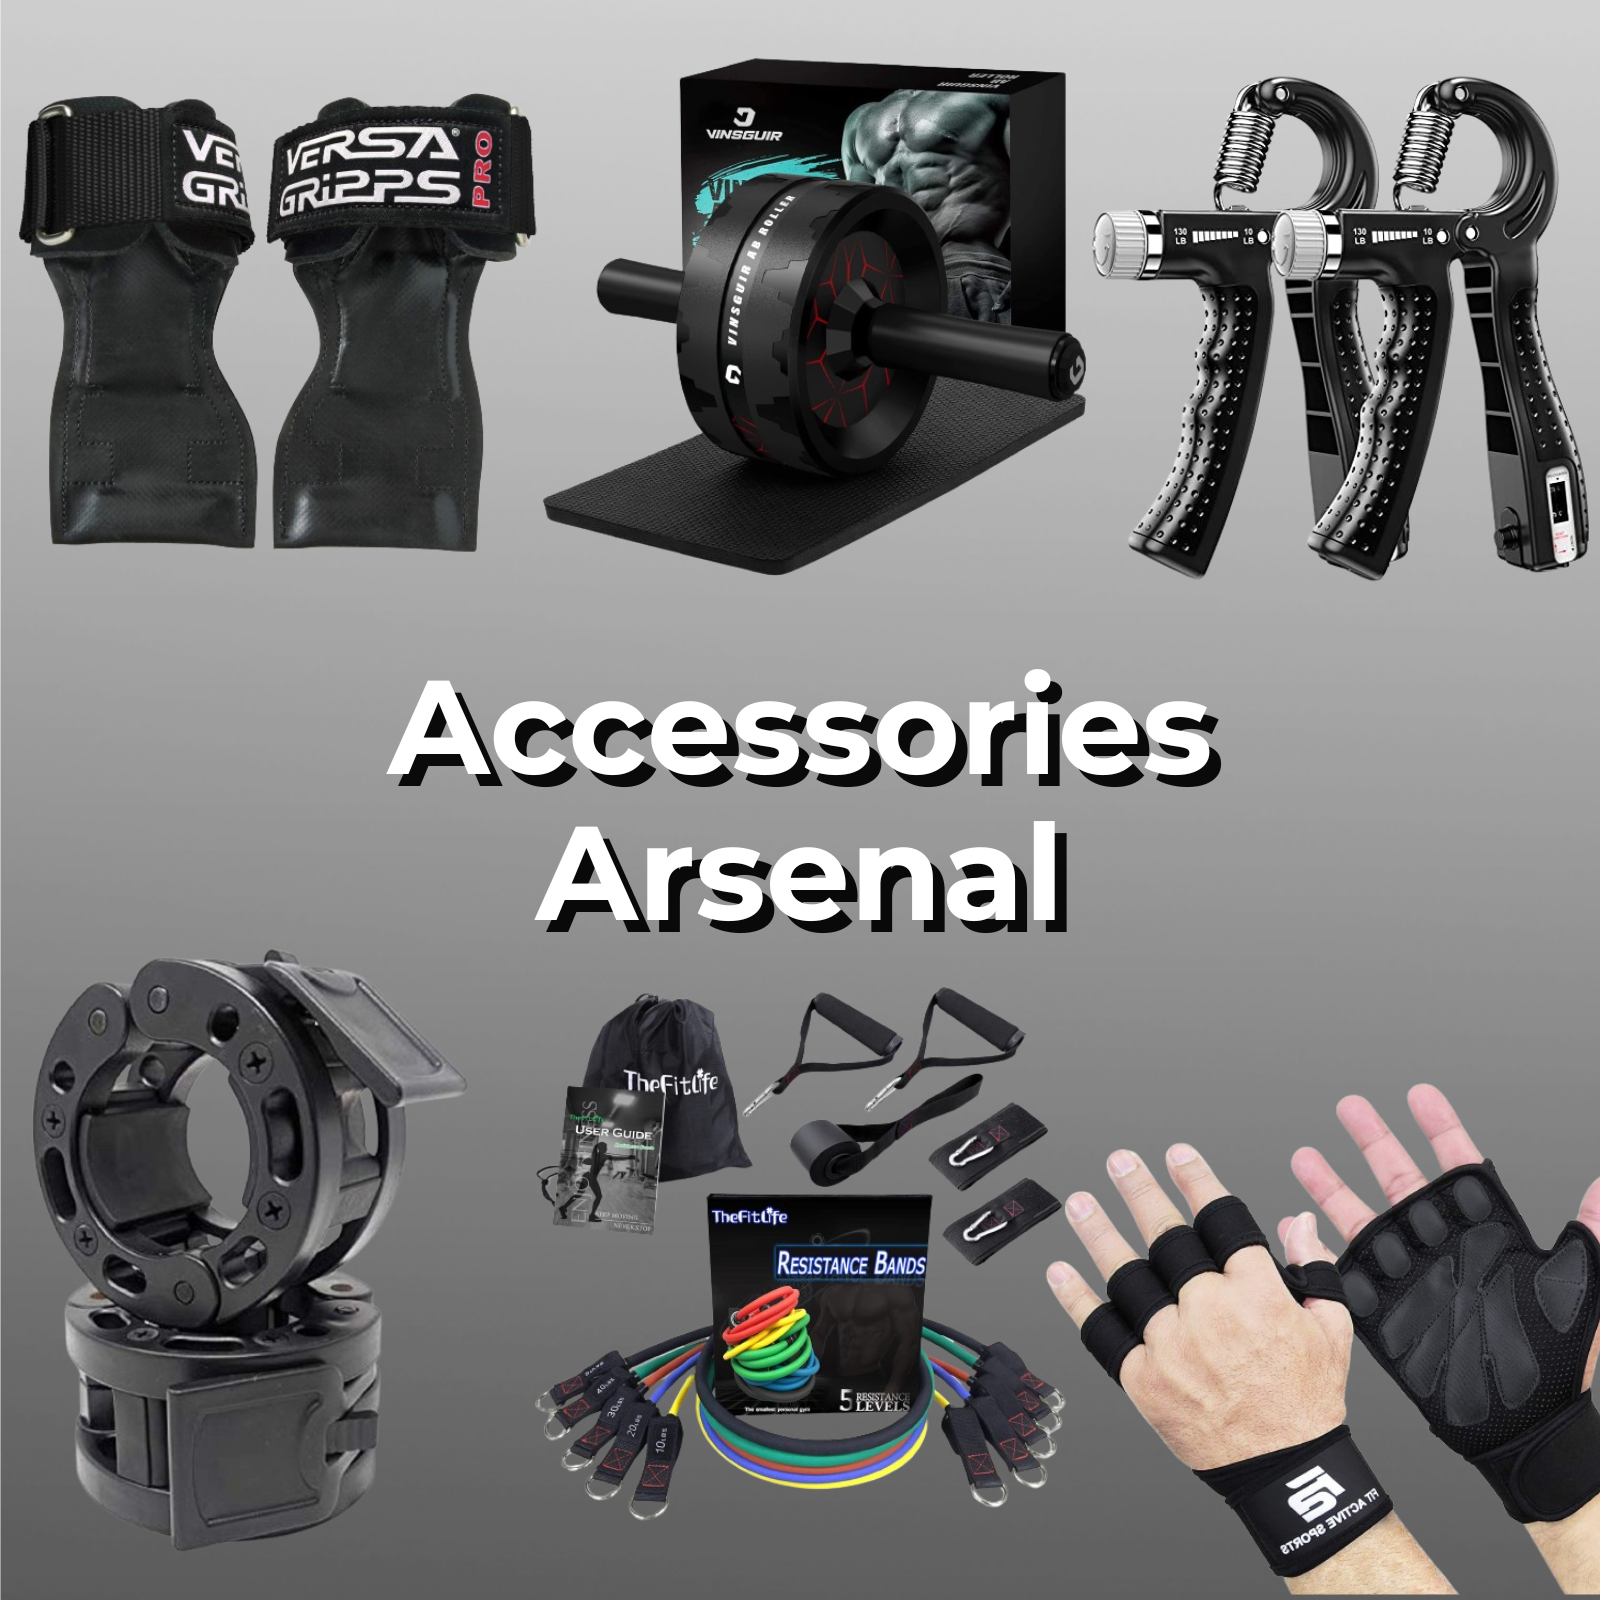 Fitness accessories like workout gloves, resistance bands, and ab roller wheels for enhanced workouts.